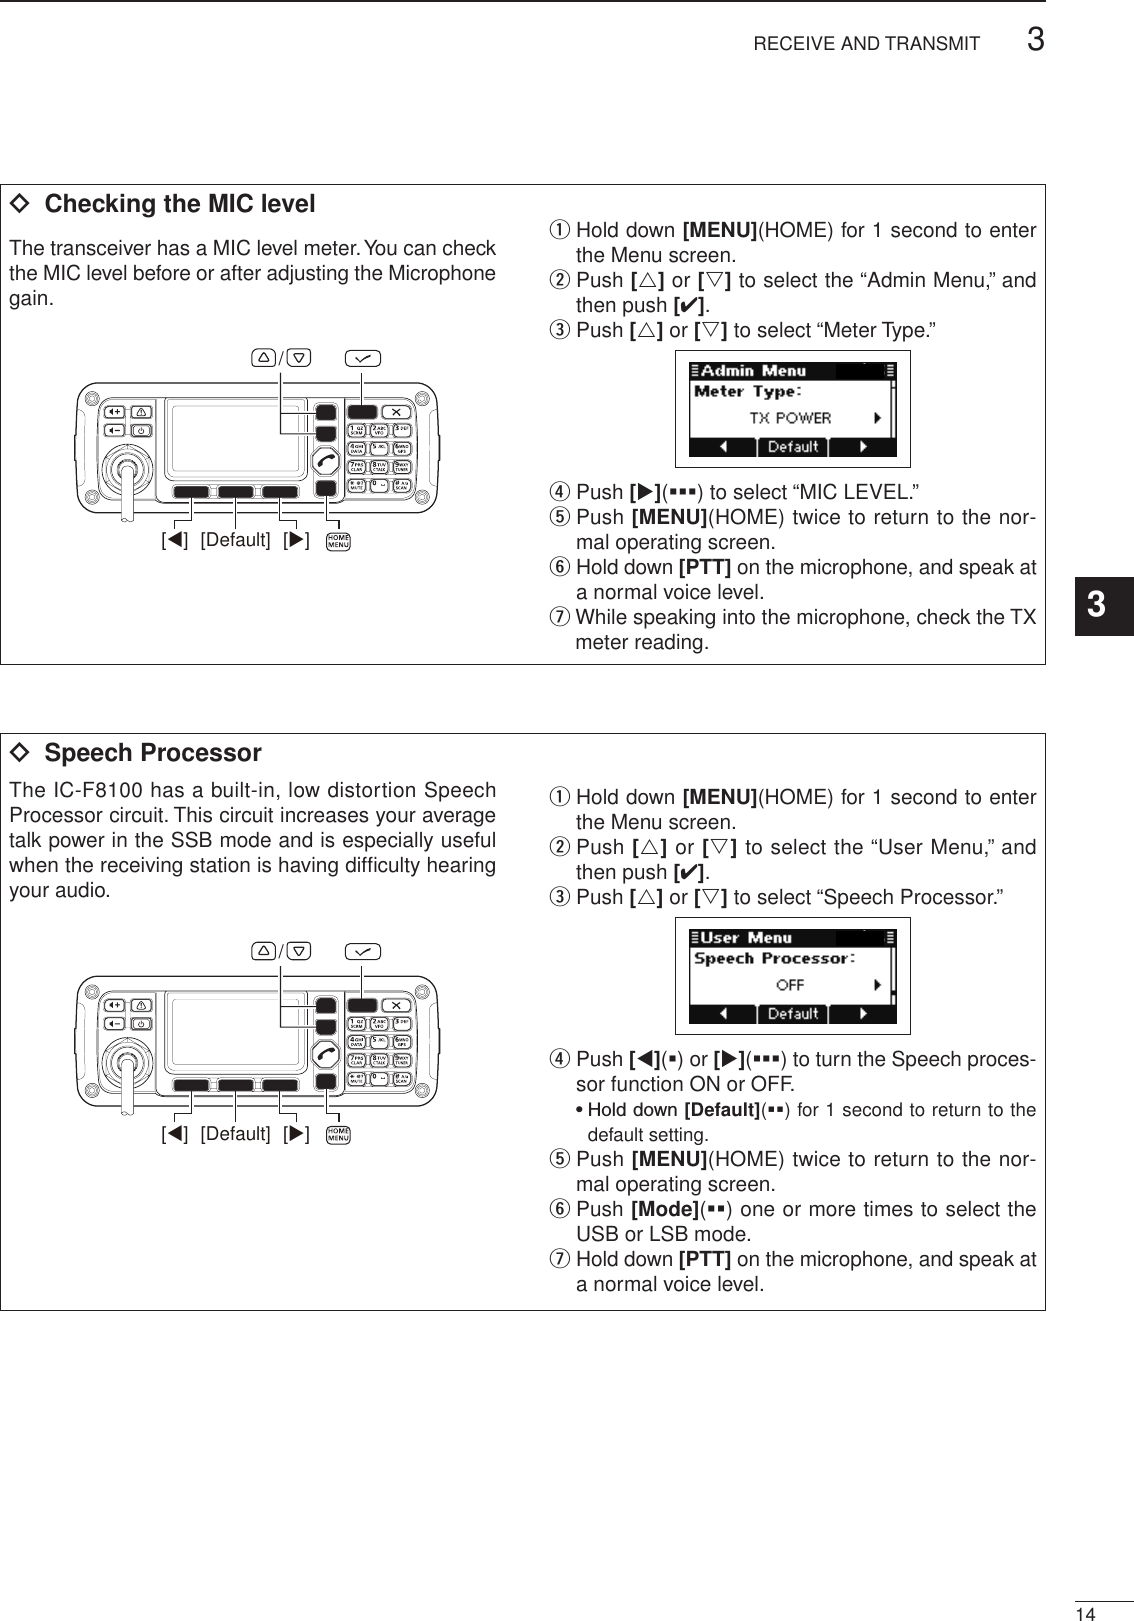 143RECEIVE AND TRANSMIT3ï  Checking the MIC levelThe transceiver has a MIC level meter. You can check the MIC level before or after adjusting the Microphone gain.[Default] [][]/q  Hold down [MENU](HOME) for 1 second to enter the Menu screen.w  Push [r] or [s] to select the “Admin Menu,” and then push [4].e Push [r] or [s] to select “Meter Type.”r  Push [u](§§§) to select “MIC LEVEL.”t  Push [MENU](HOME) twice to return to the nor-mal operating screen.y  Hold down [PTT] on the microphone, and speak at a normal voice level.u  While speaking into the microphone, check the TX meter reading.ï  Speech ProcessorThe IC-F8100 has a built-in, low distortion Speech Processor circuit. This circuit increases your average talk power in the SSB mode and is especially useful when the receiving station is having difﬁculty hearing your audio.[Default] [][]/q  Hold down [MENU](HOME) for 1 second to enter the Menu screen.w  Push [r] or [s] to select the “User Menu,” and then push [4].e Push [r] or [s] to select “Speech Processor.”r  Push [t](§) or [u](§§§) to turn the Speech proces-sor function ON or OFF.  •  Hold down [Default](§§) for 1 second to return to the default setting.t  Push [MENU](HOME) twice to return to the nor-mal operating screen.y  Push [Mode](§§) one or more times to select the USB or LSB mode.u  Hold down [PTT] on the microphone, and speak at a normal voice level.2001 NEW